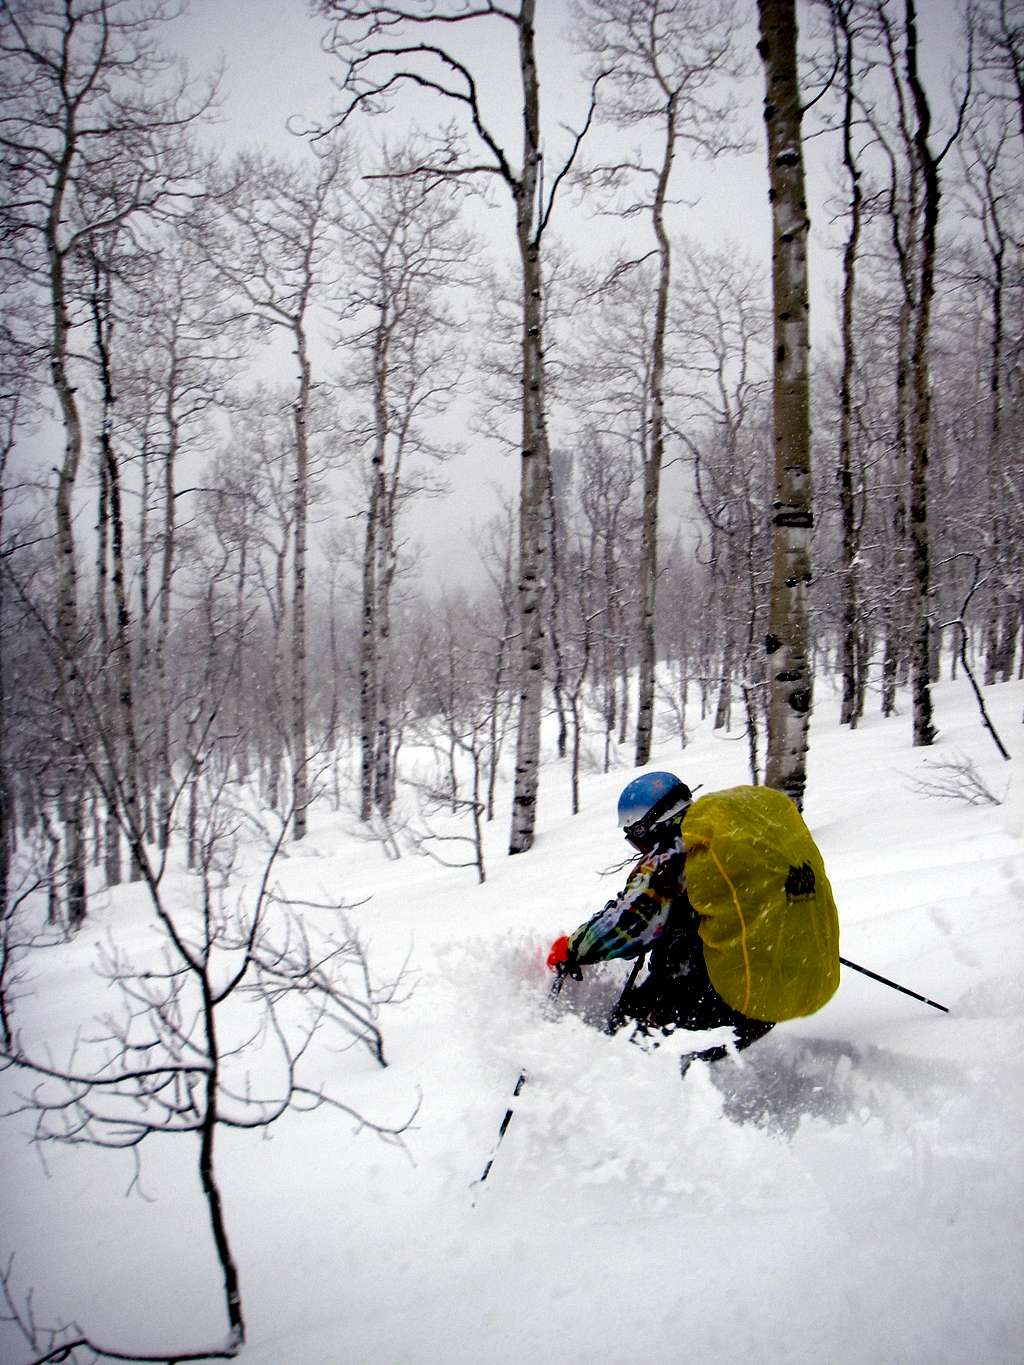 Skiing Willow Fork